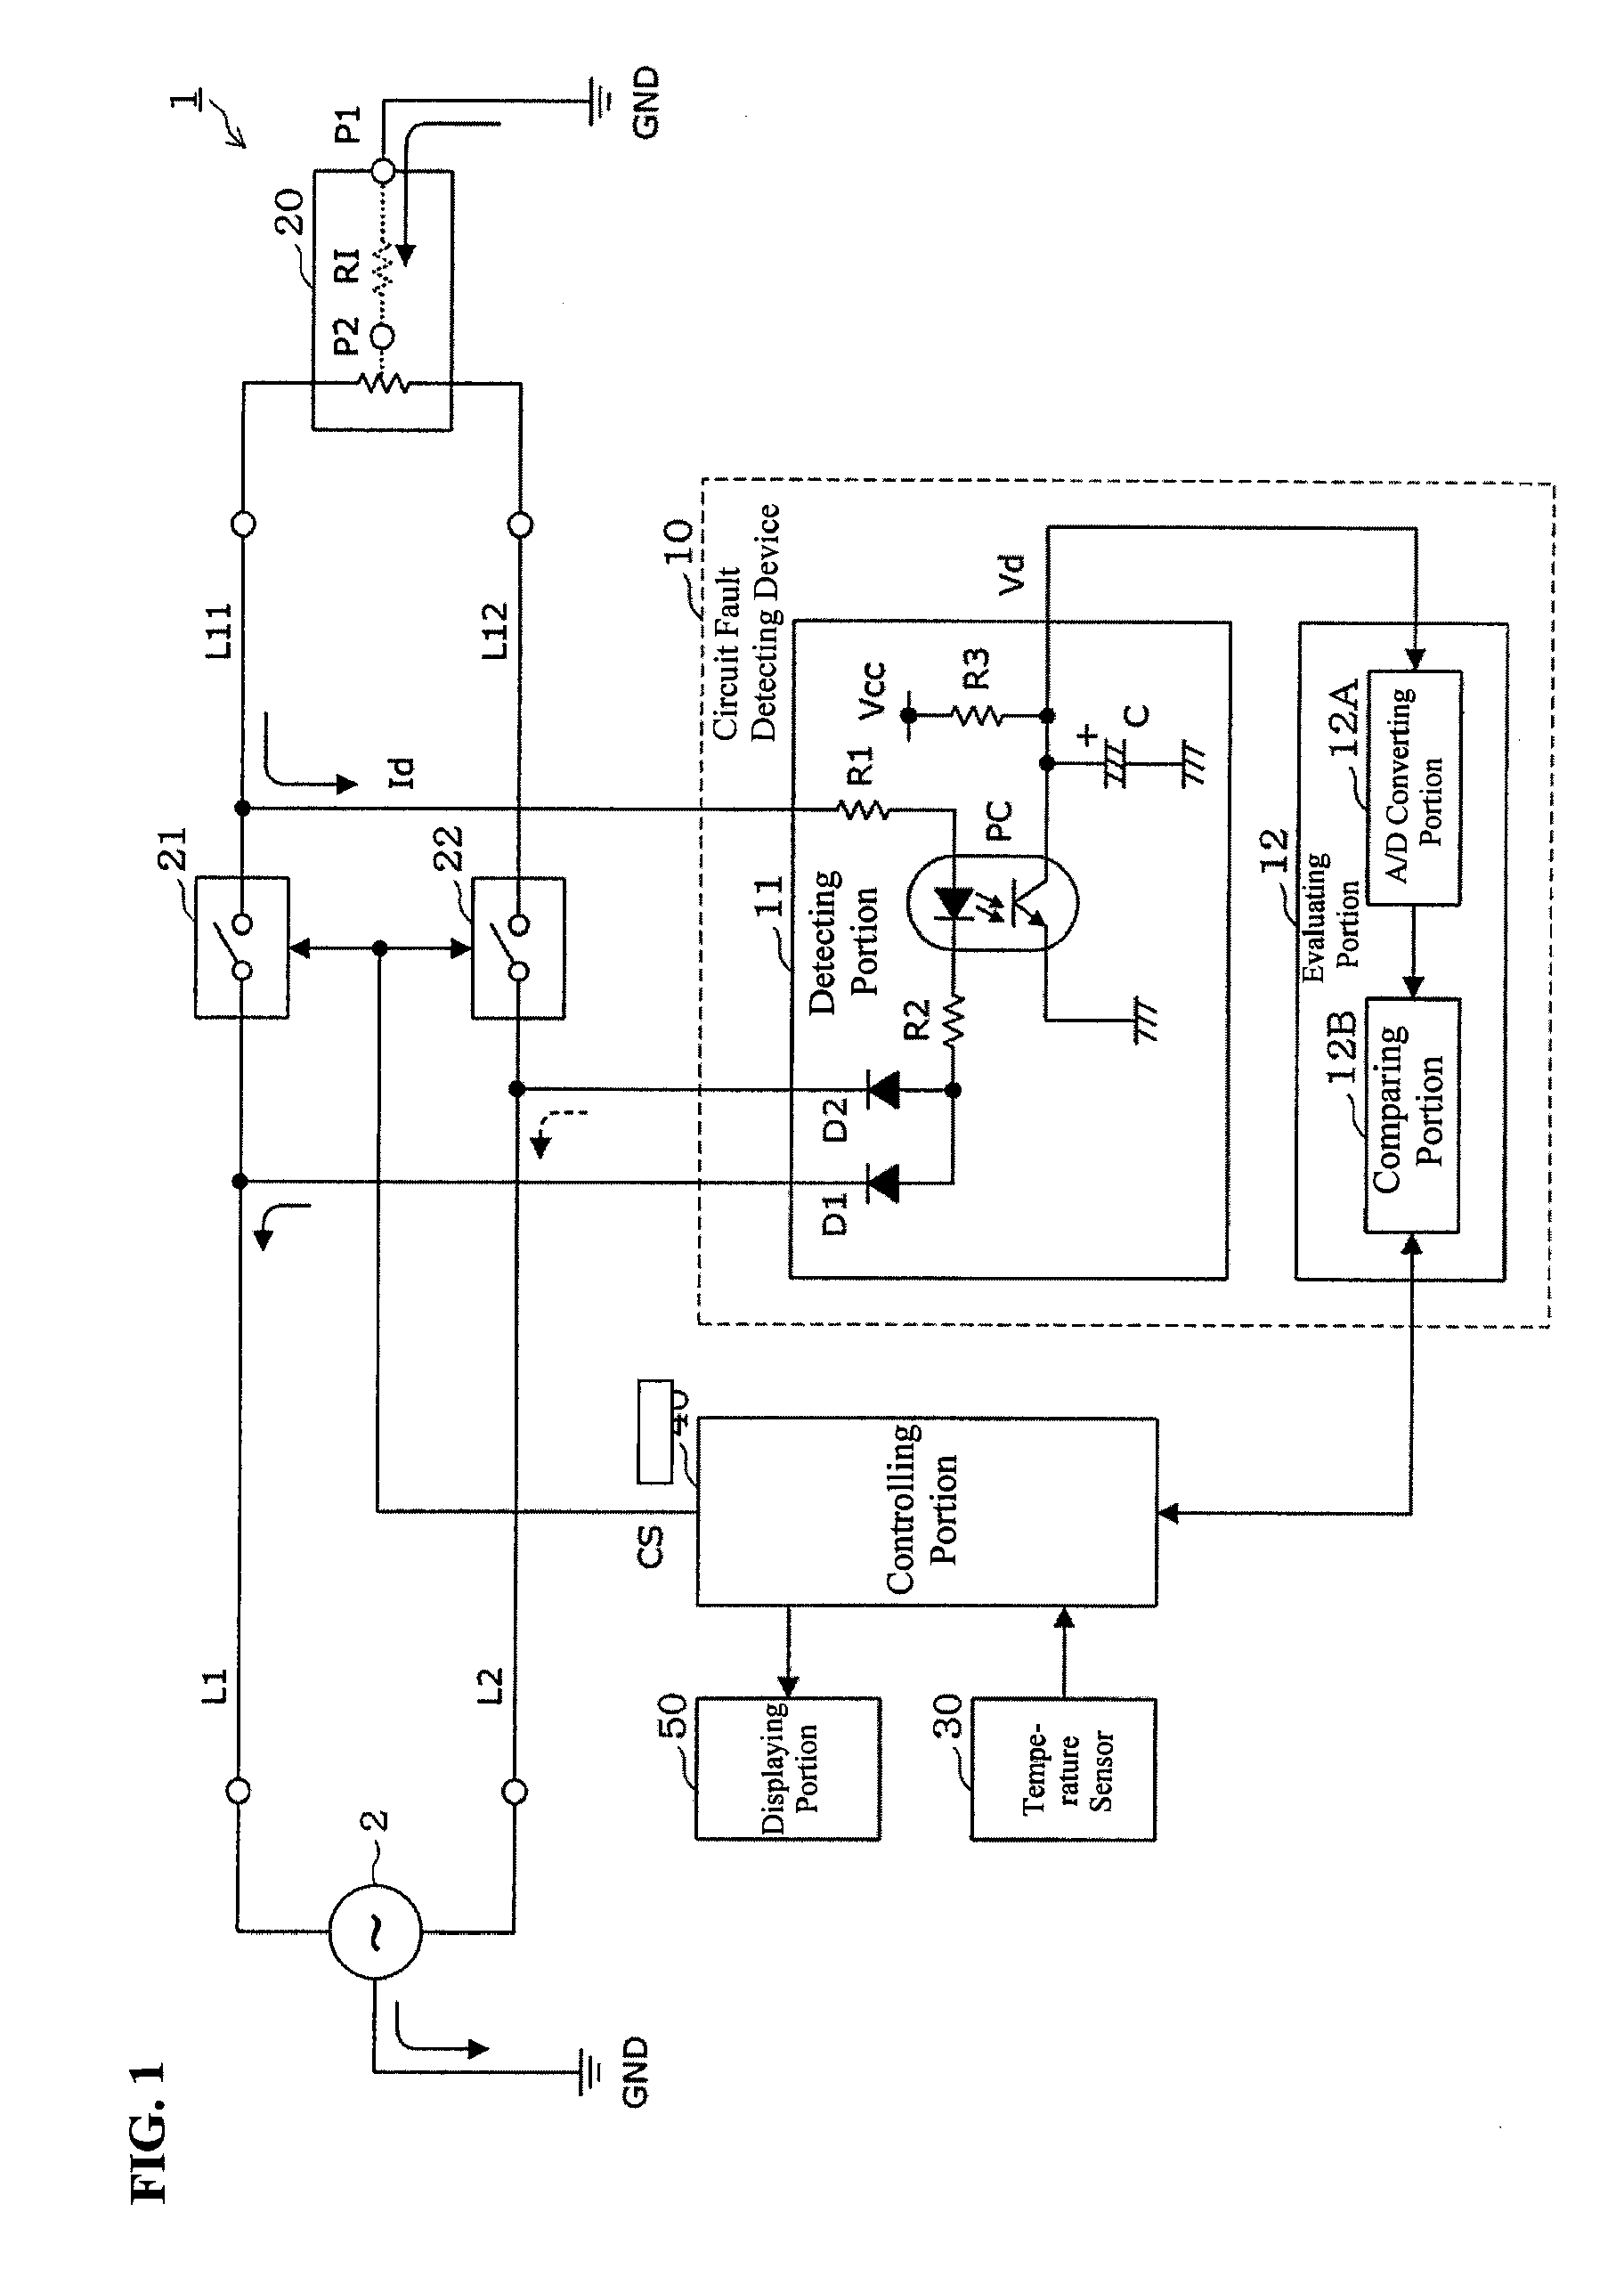 Circuit fault detecting device and method